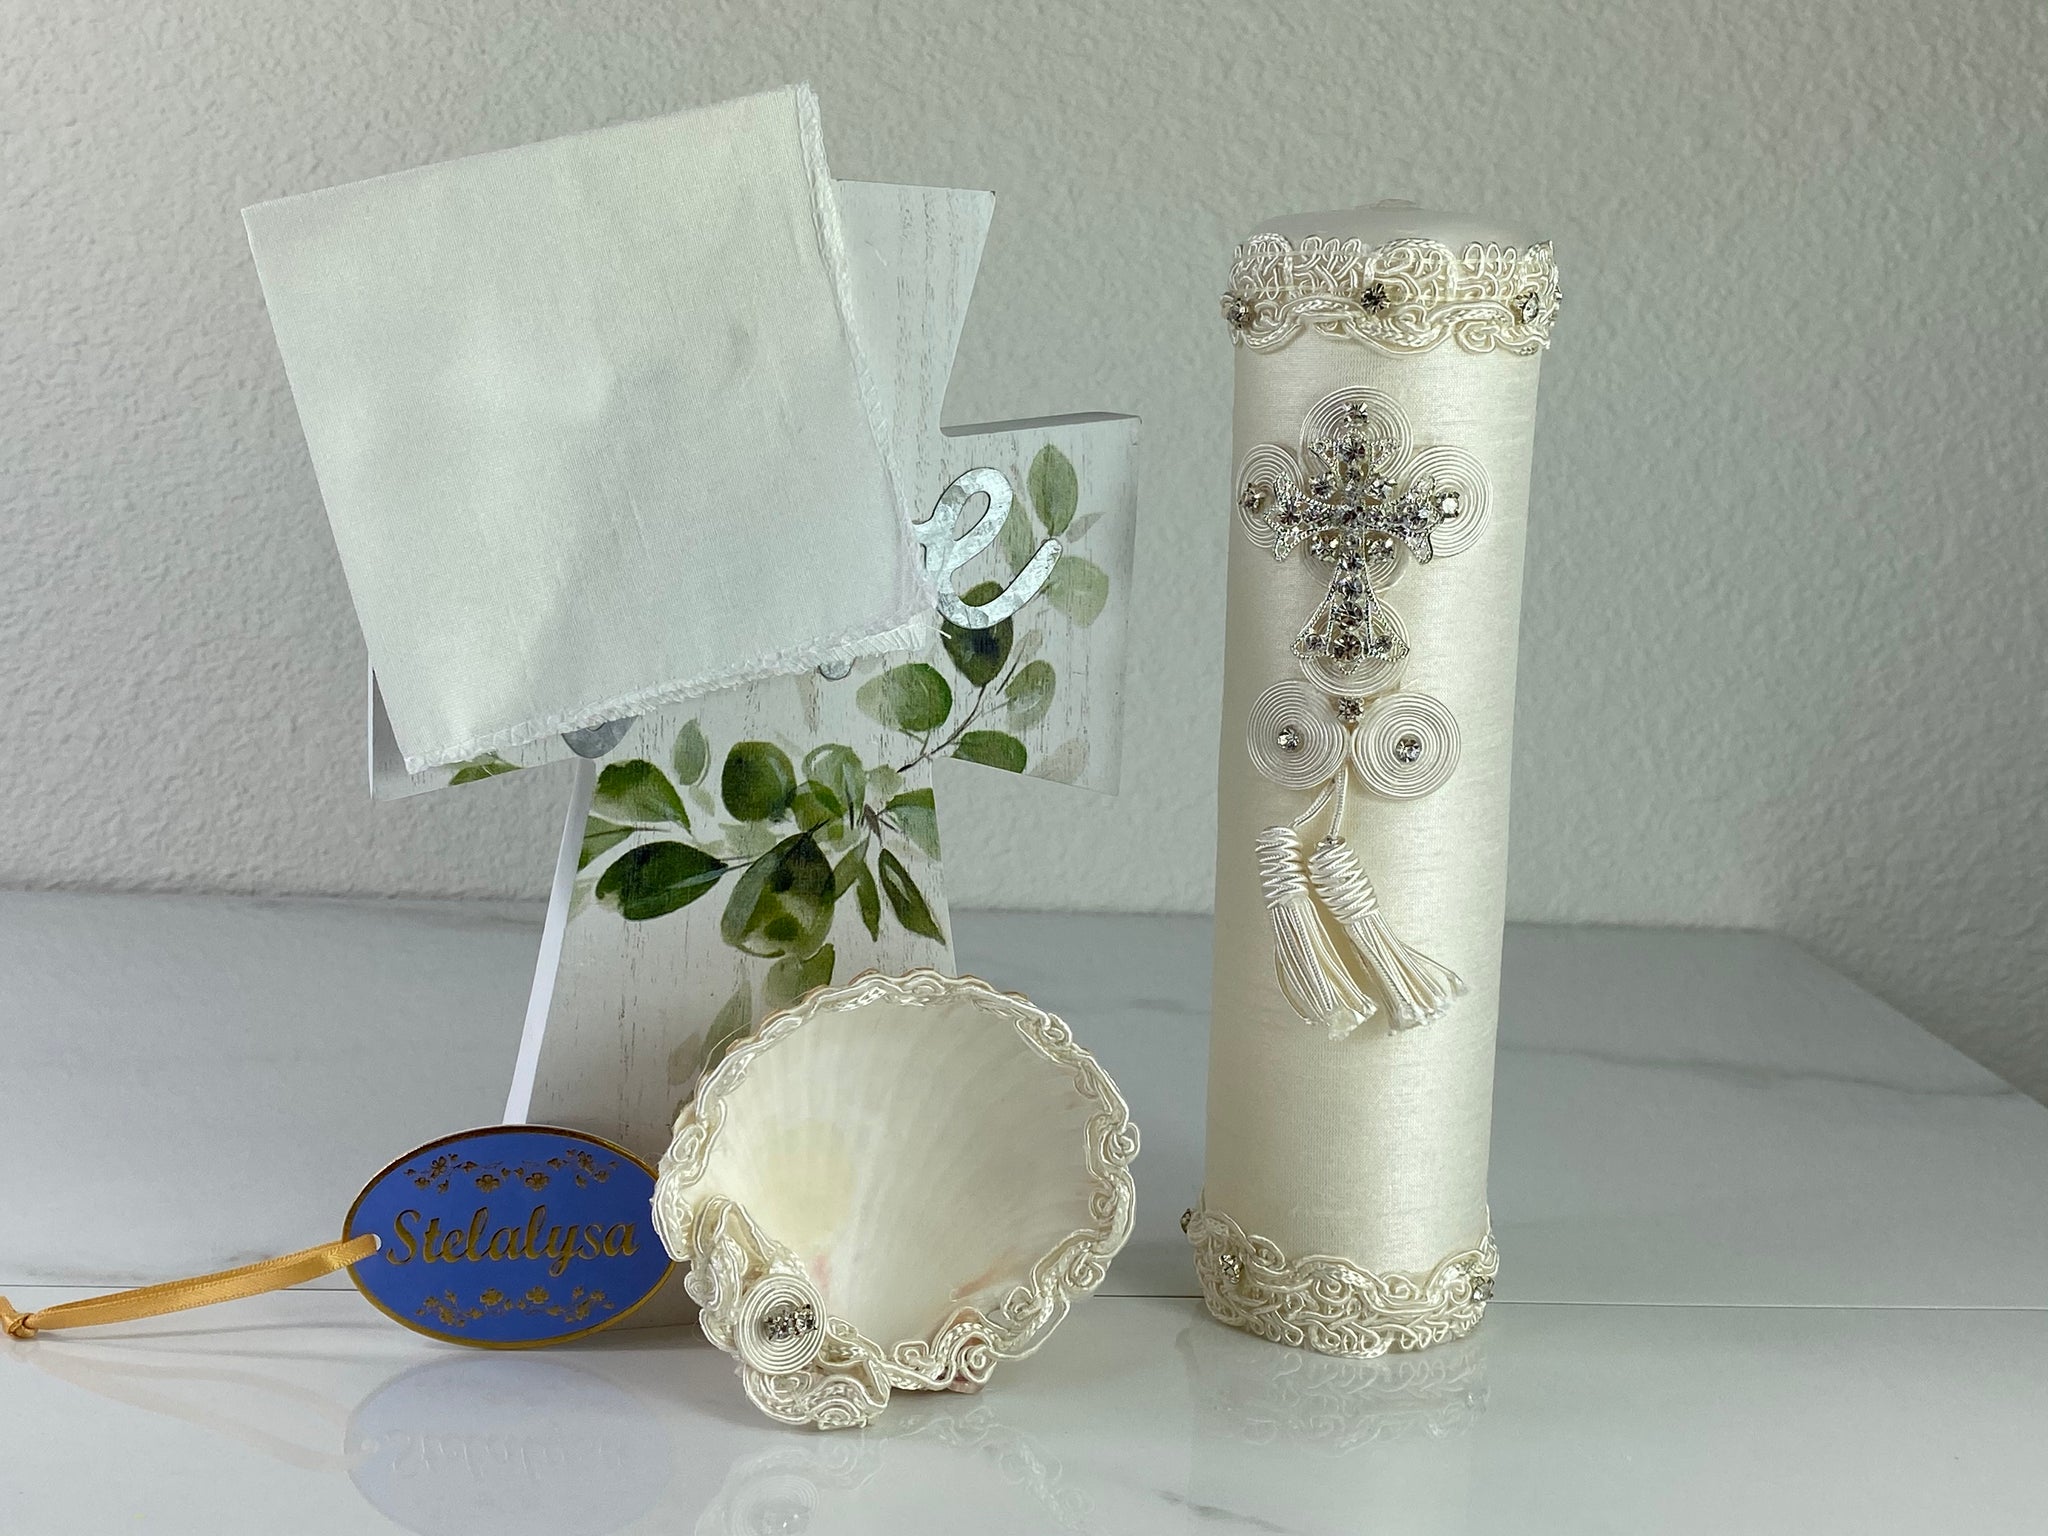 These one-of-a-kind Candle set is handmade and ivory in color.  This candle has a classic look.   It is uniquely decorated with crystals, lace, cross, and tassels making it a gorgeous keepsake.   This candle is cylinder in shape and matches many outfits from the Boys' Baptism Collection.    To match, the Shell is put together piece by piece to compliment the Candle and Handkerchief.  The Handkerchief is made of satin and embroidered lace to match the Shell and Candle beautifully.  